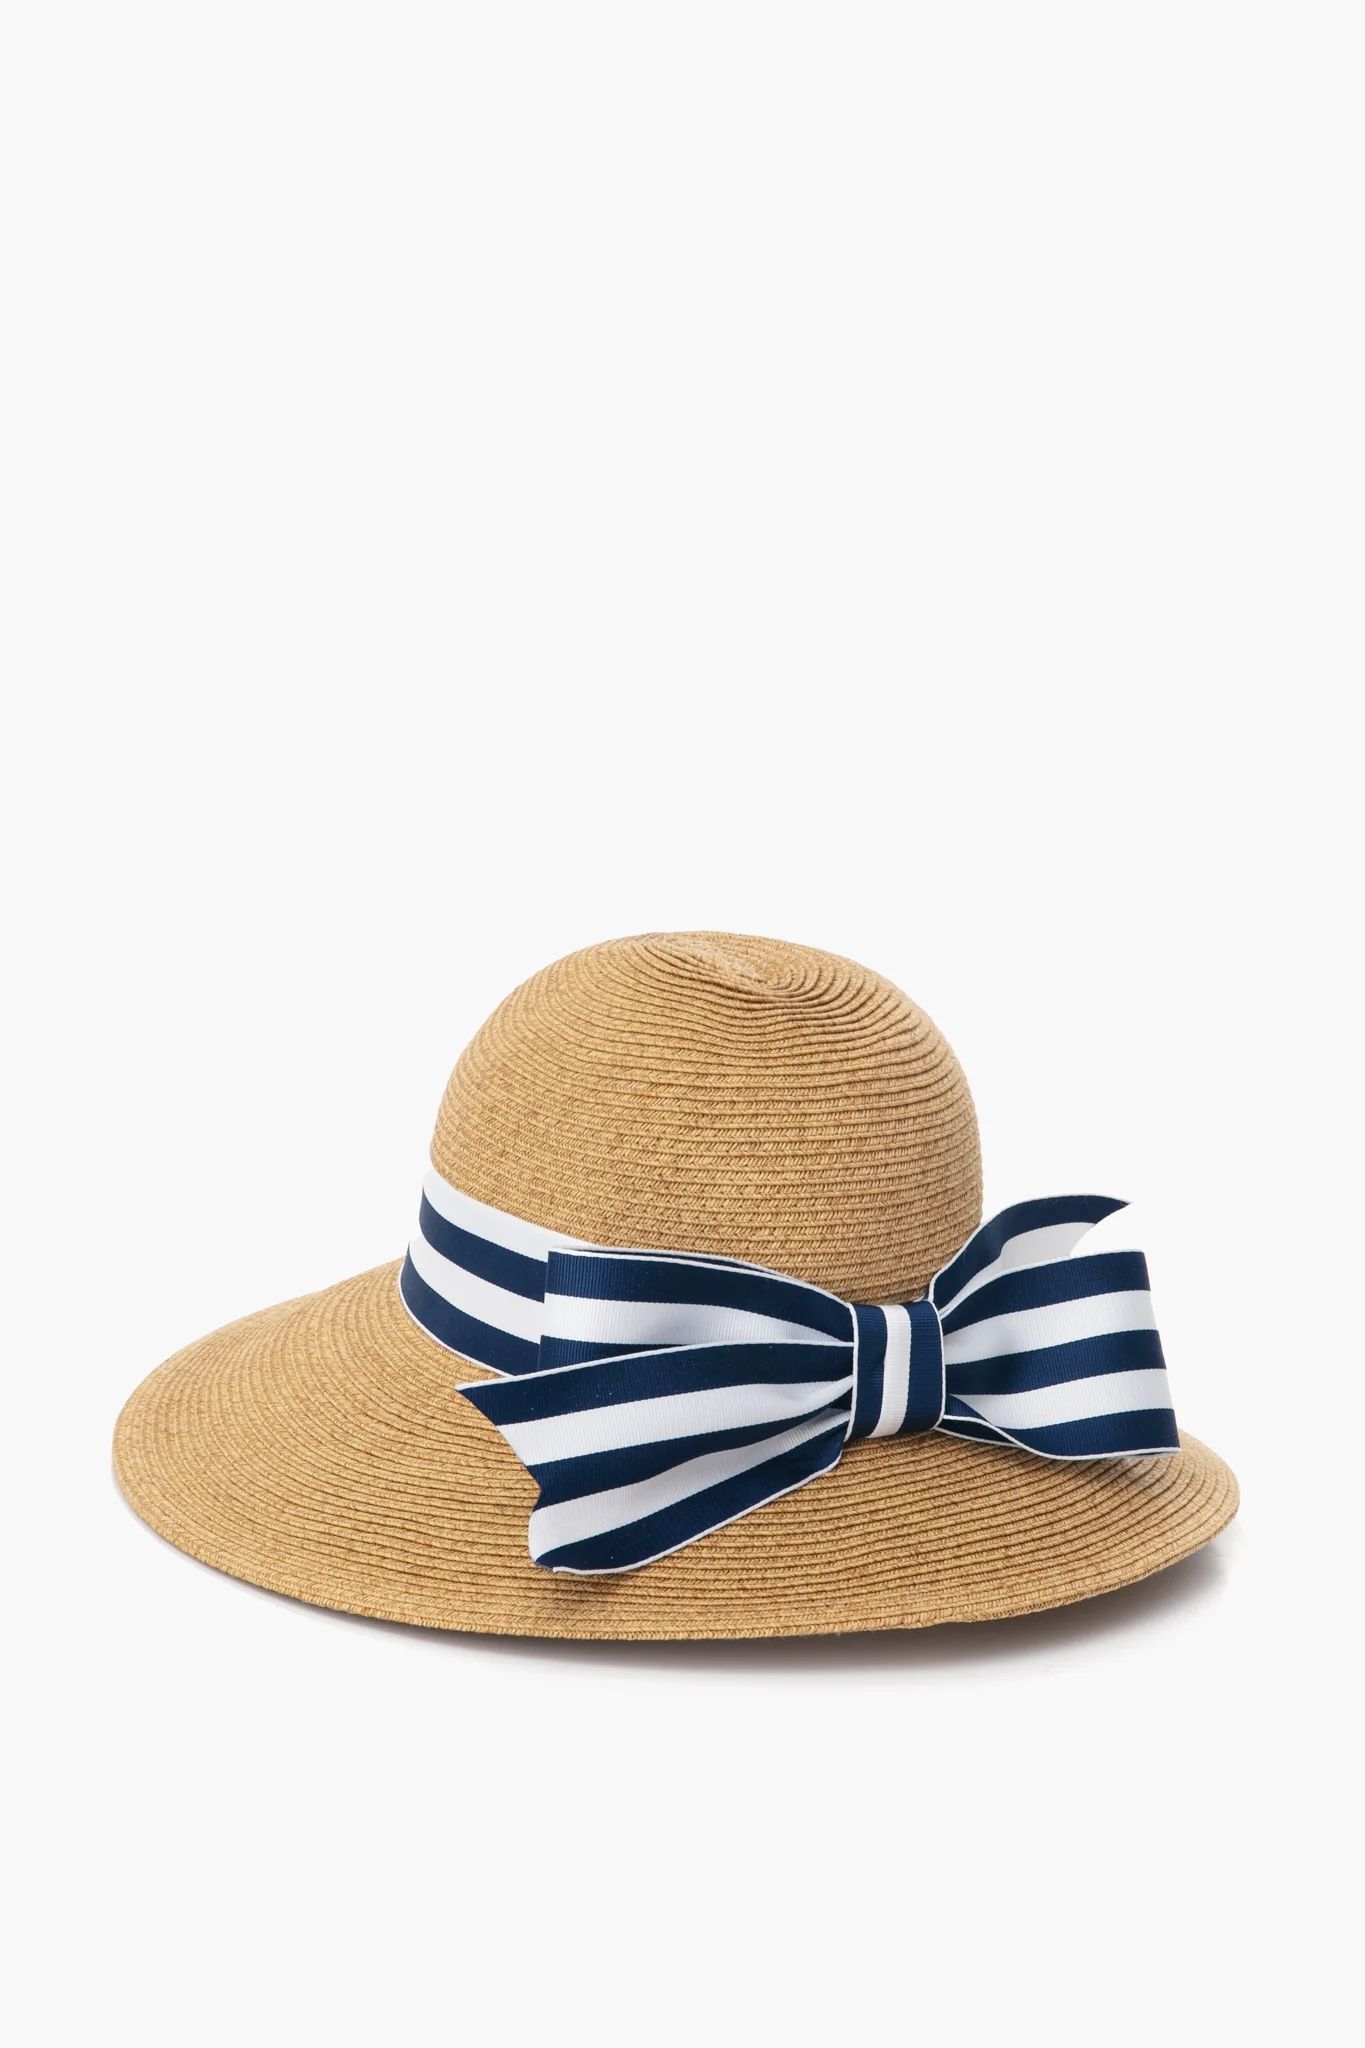 Exclusive Striped Packable Wide Bow Sunhat | Tuckernuck (US)